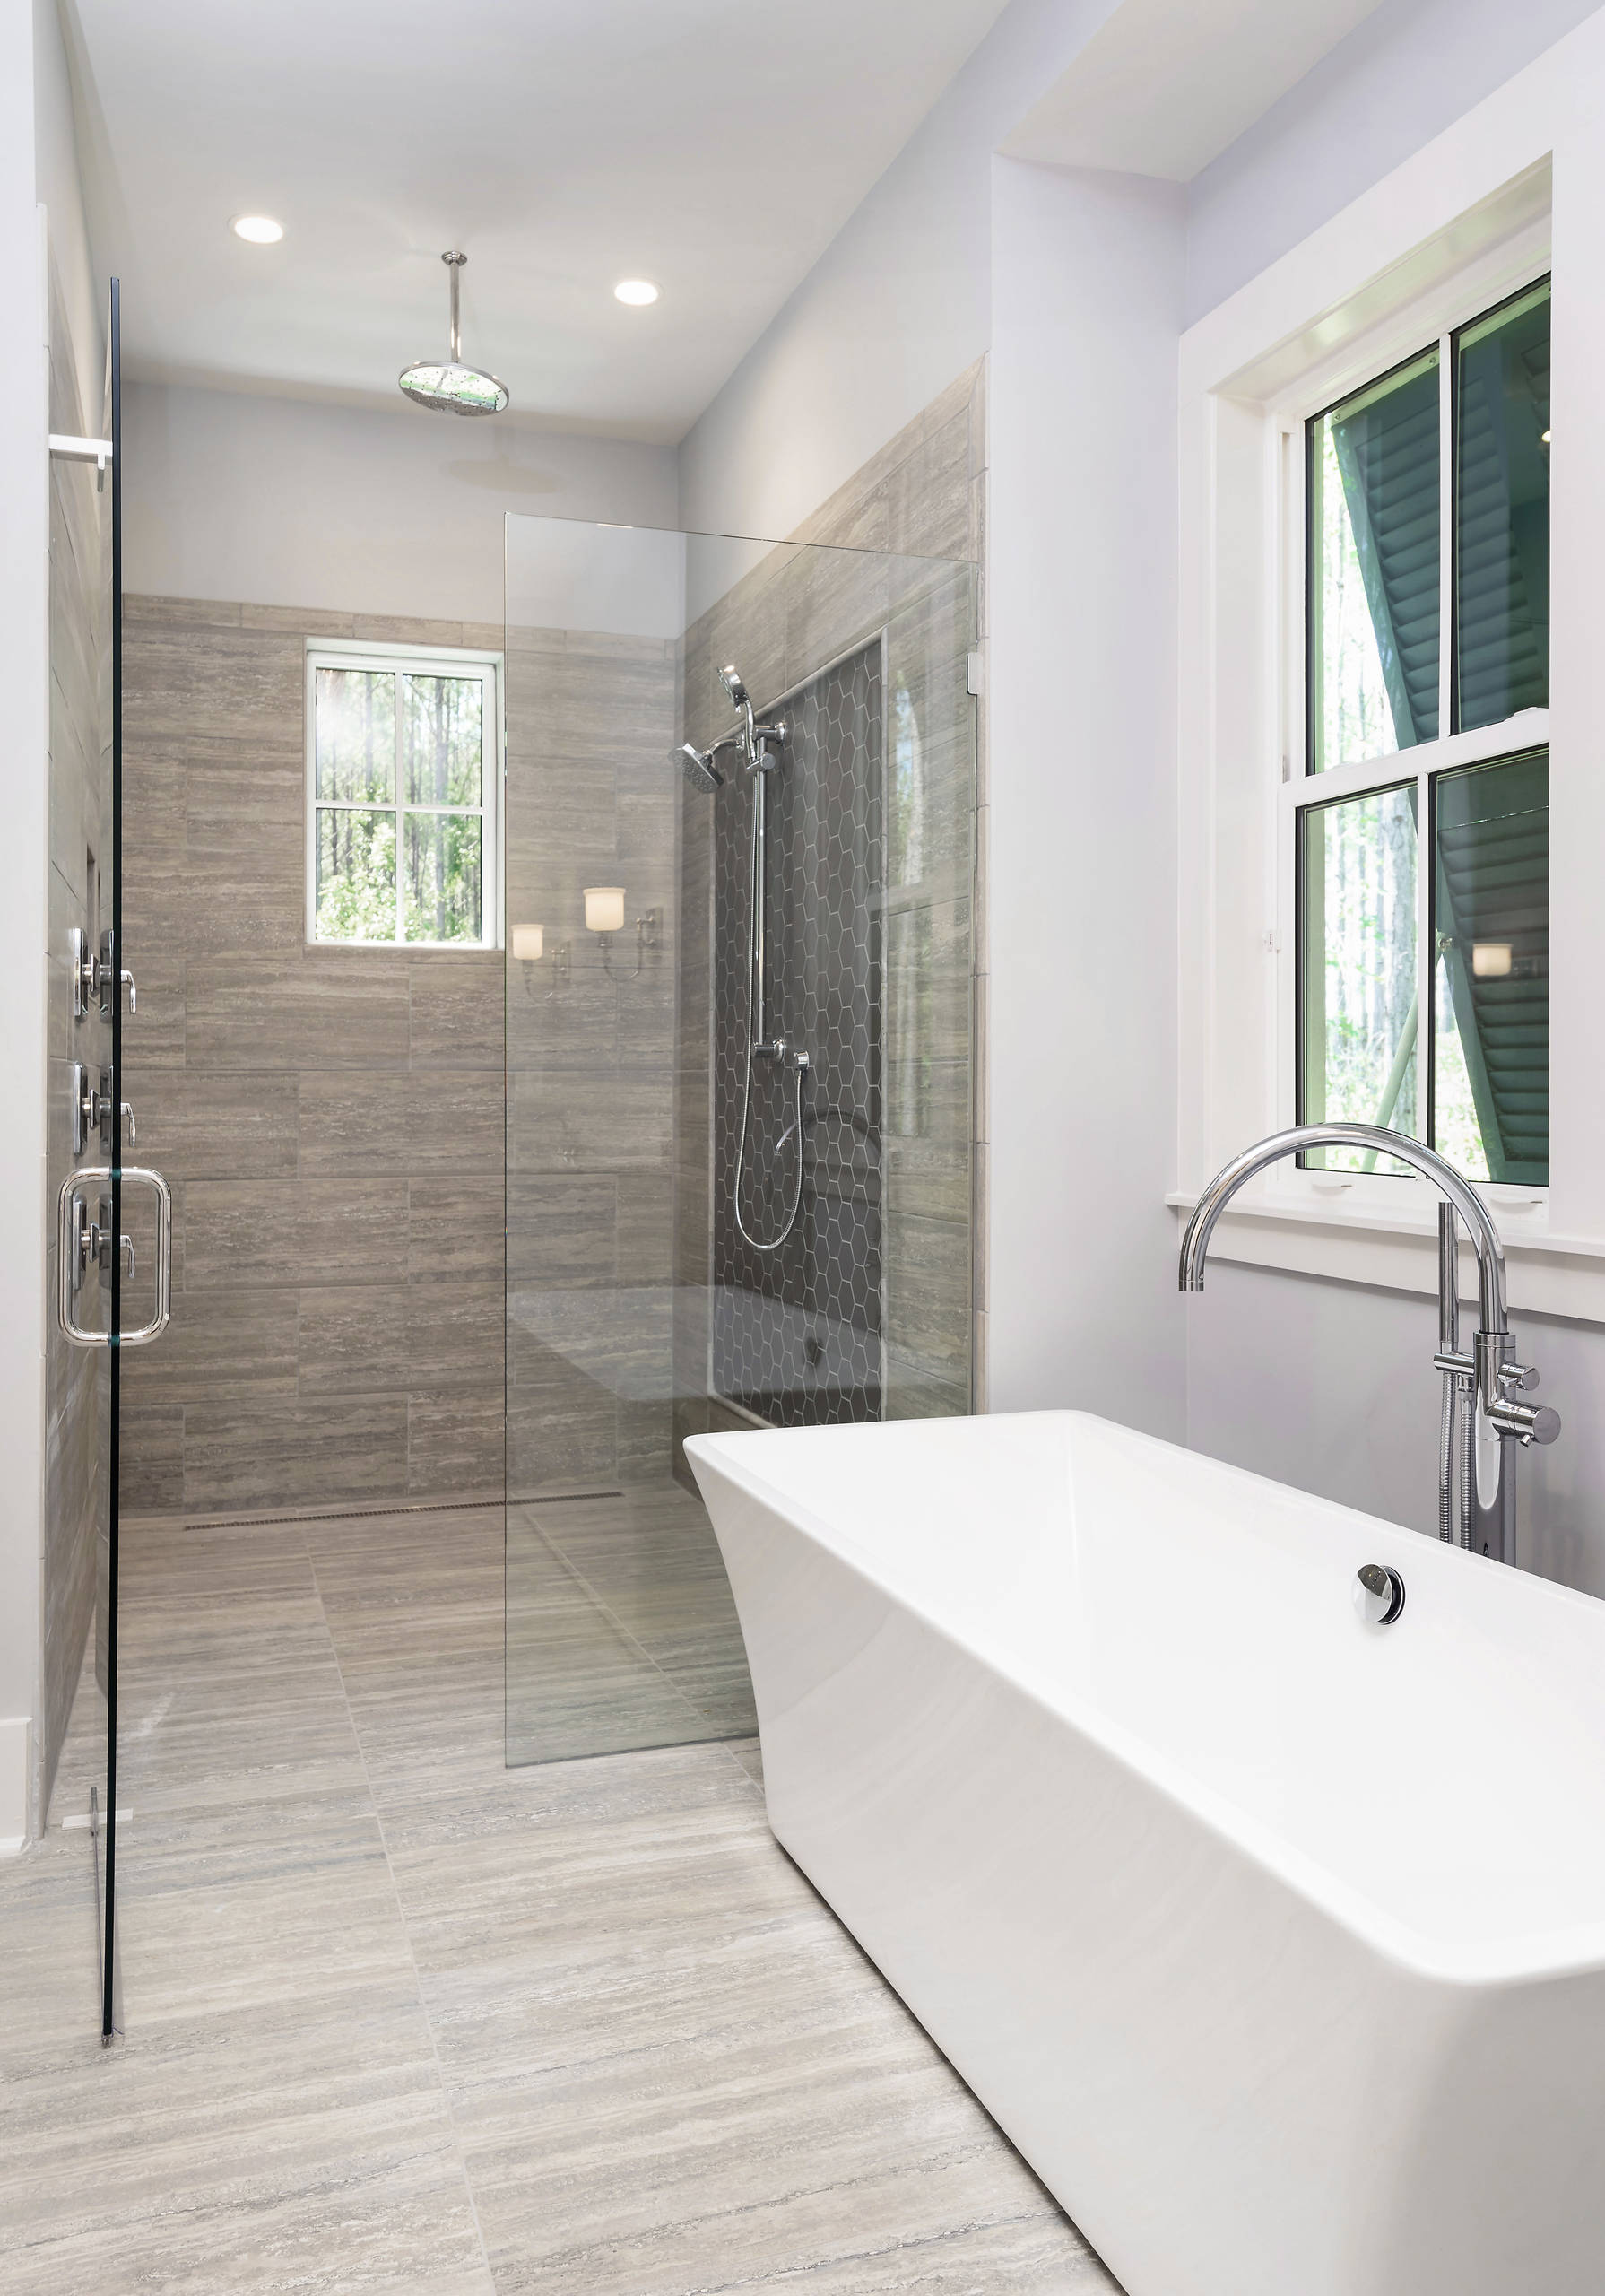 75 Large Walk-In Shower Ideas You'll Love - February, 2023 | Houzz